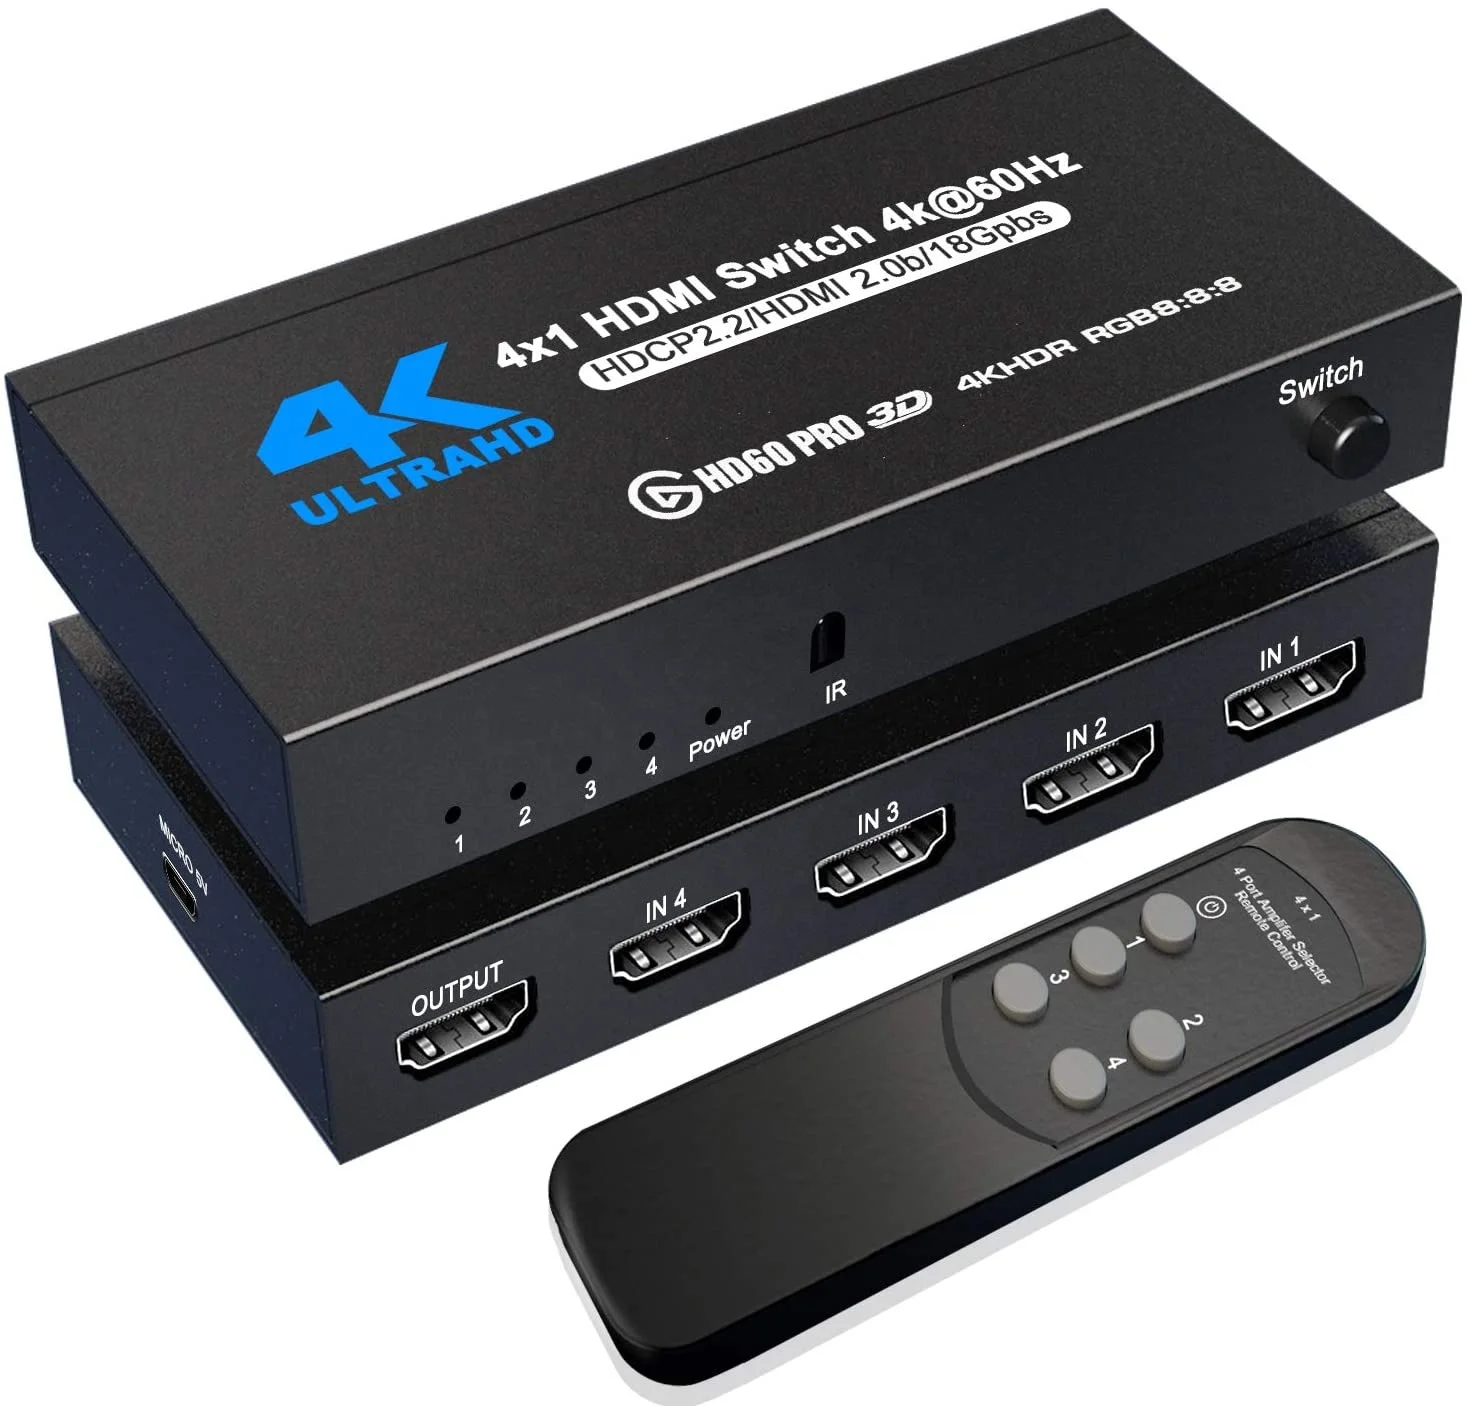 

OZQ5-2 HDMI Switch 4K@60Hz 4 Port HDMI 2.0 Switcher Selector 4 in 1 Out with IR Remote Control Supports 4K HDR10 HDCP 2.2, Black